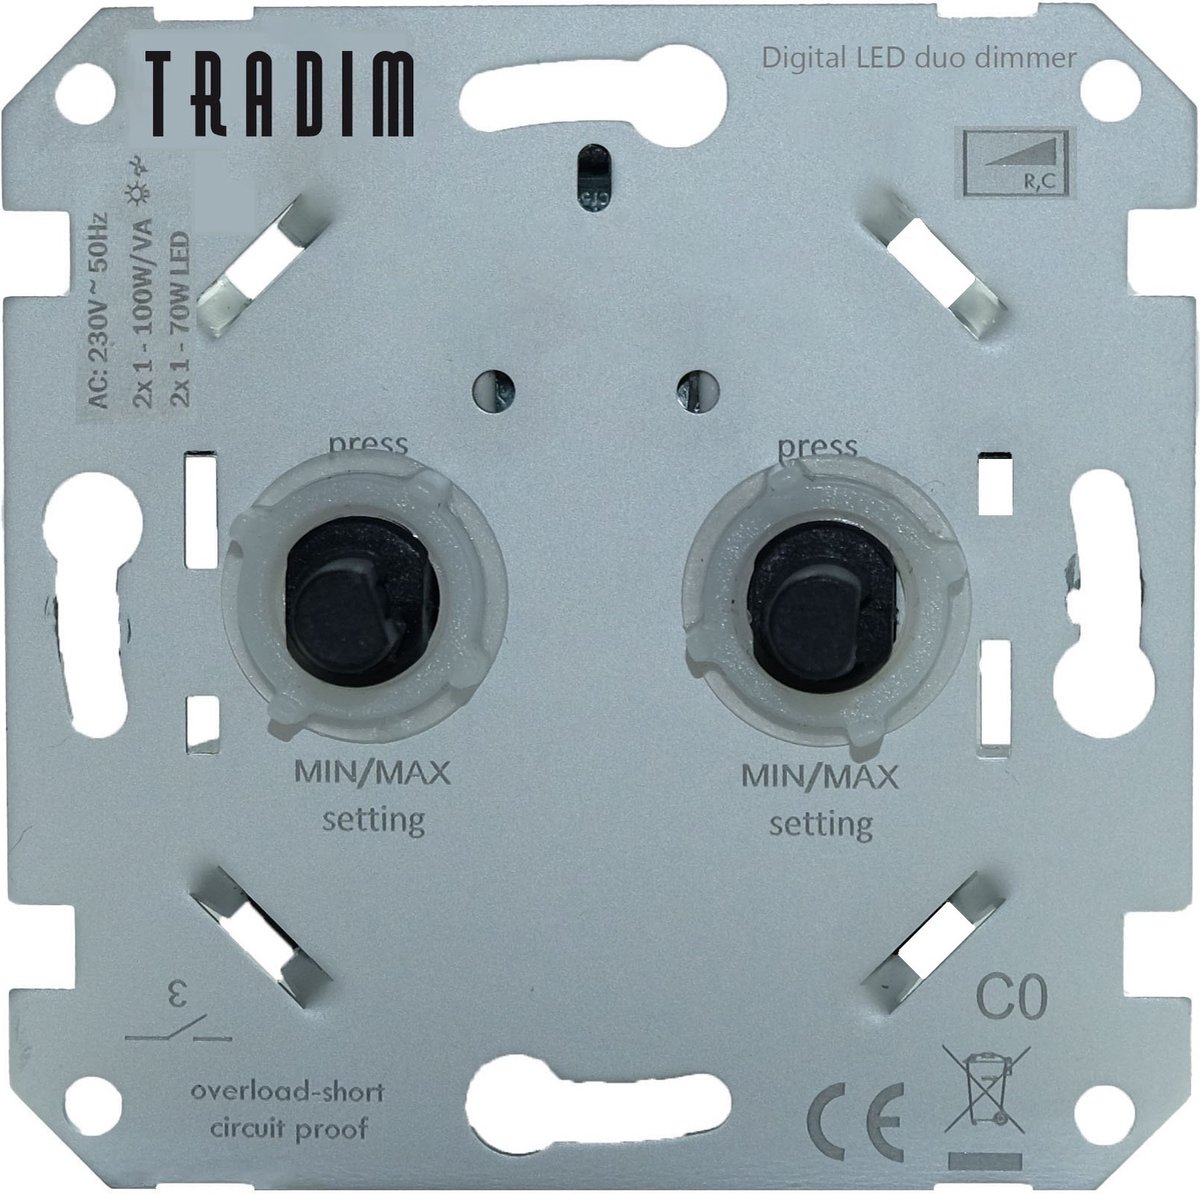 Tradim - LED Dimmer DUO inbouw - 1-100W - Fase afsnijding